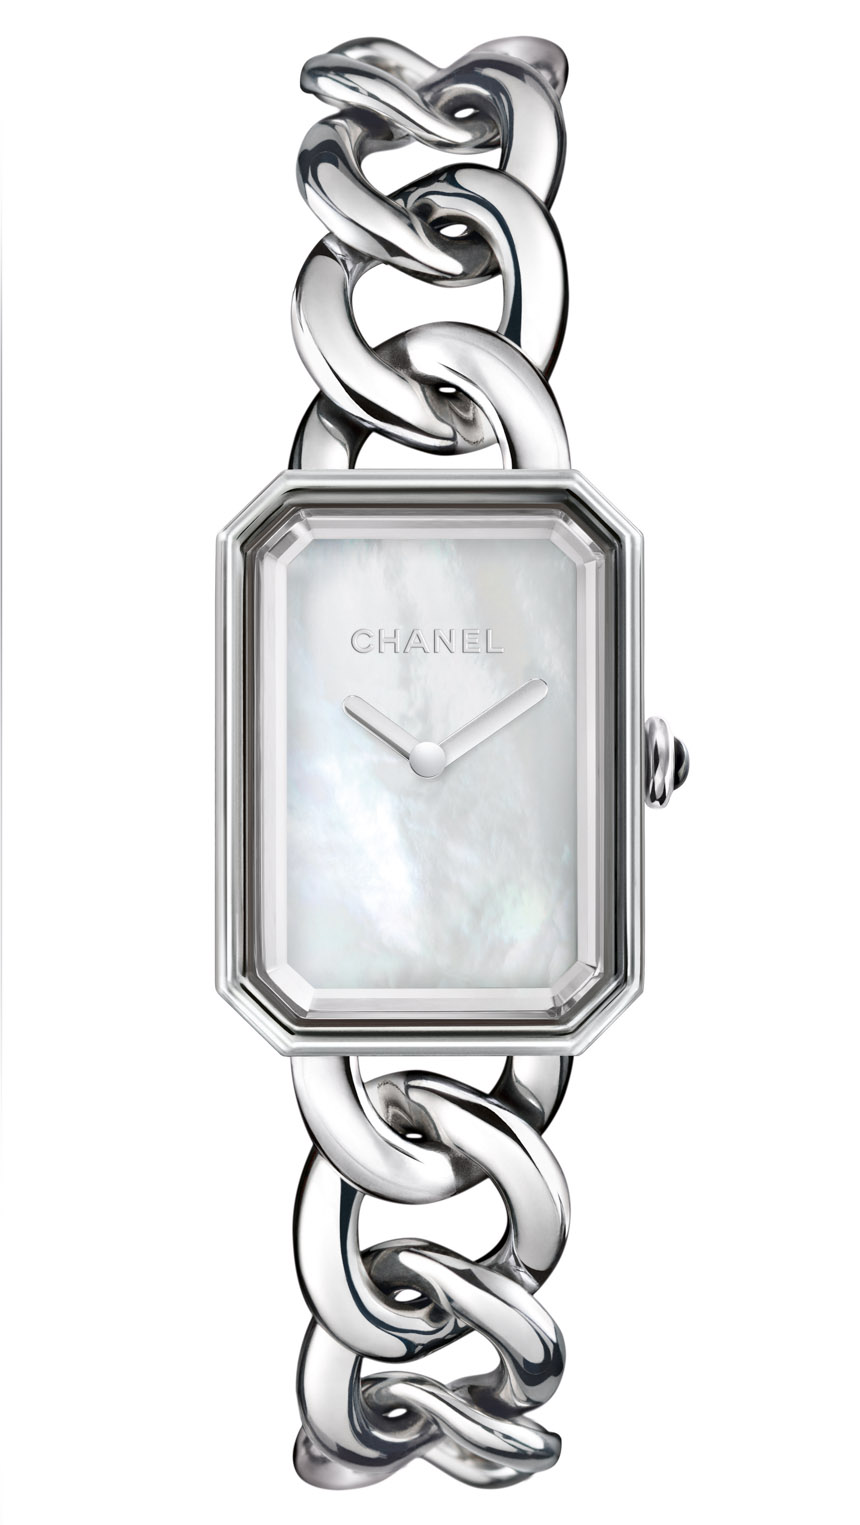 Chanel Premiere: Possibly The Best Ladies Watch Of 2013, Page 2 of 2